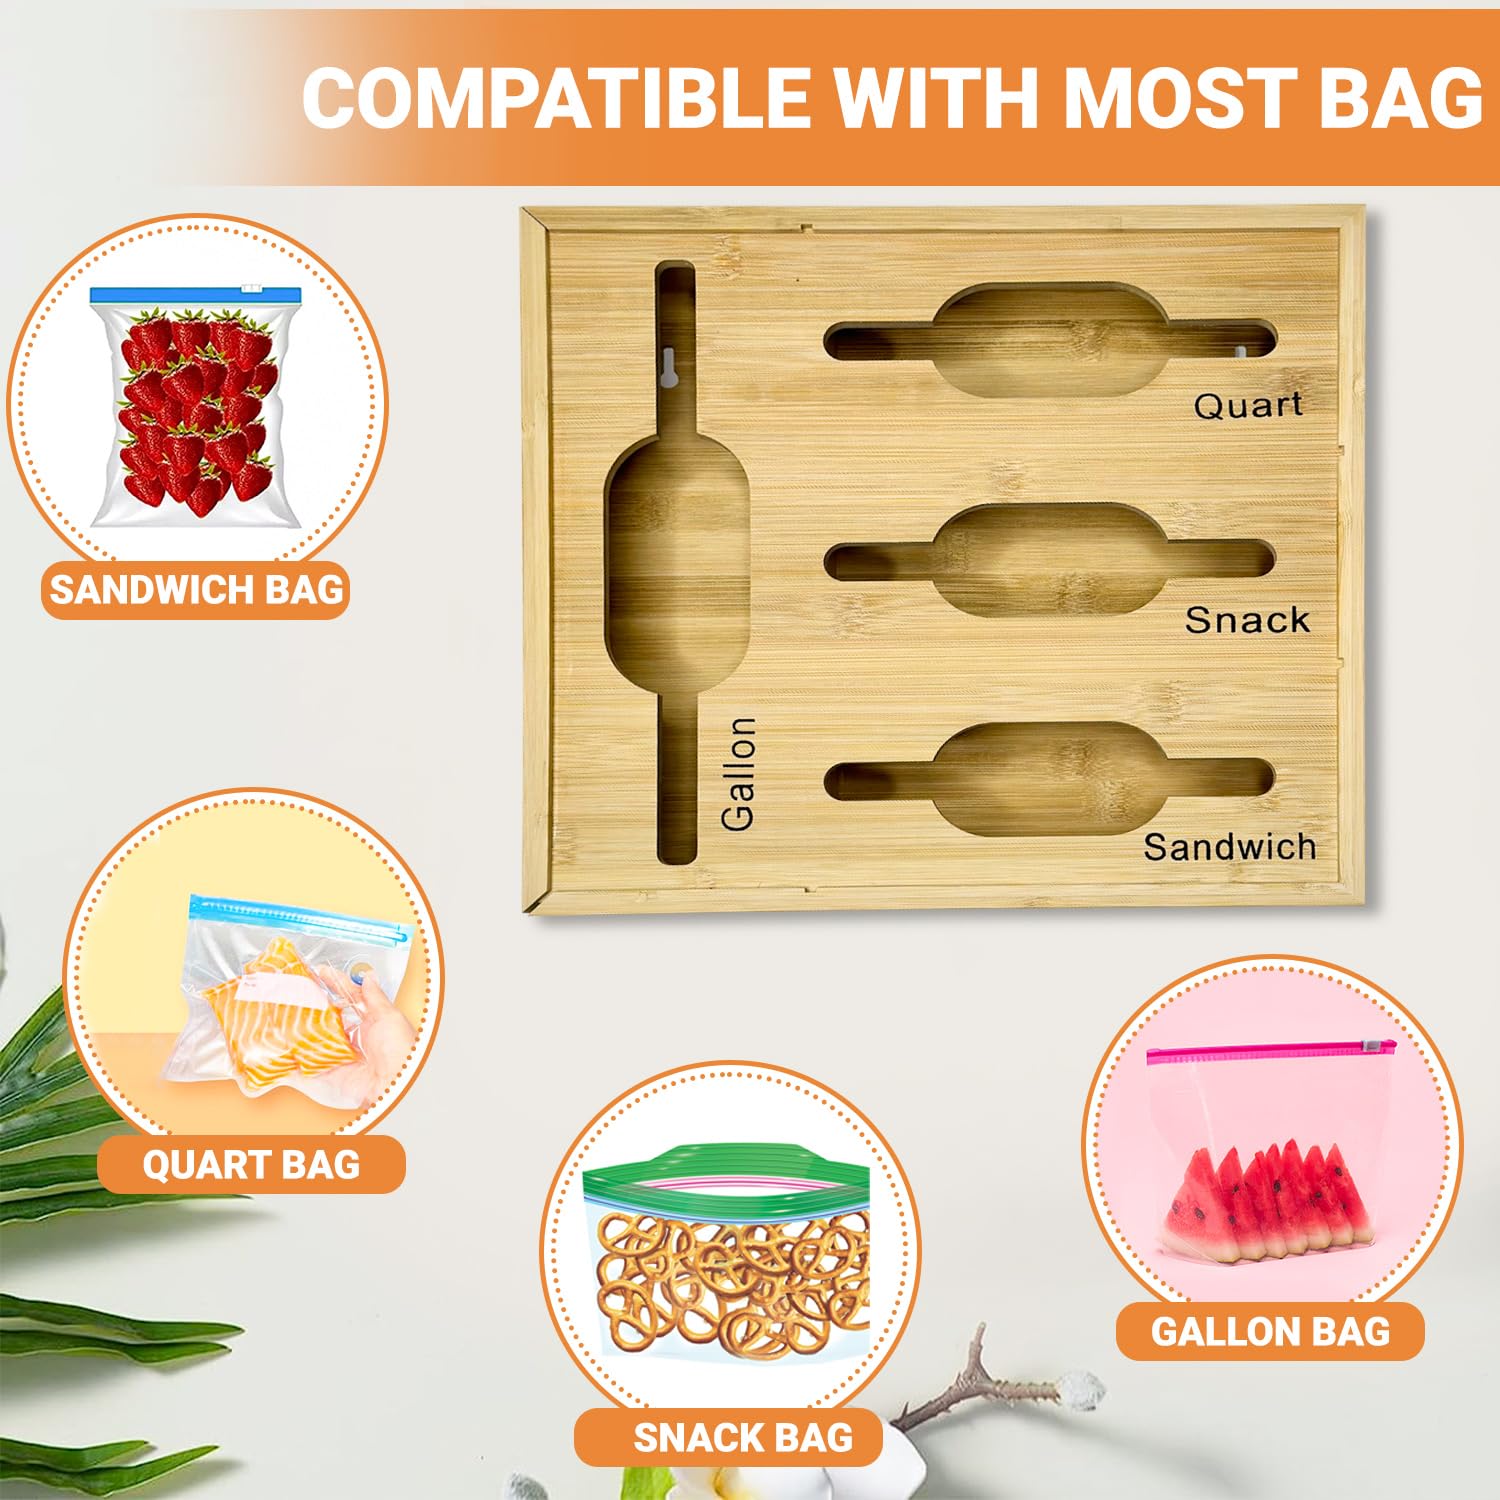 SYLAS LIFESTYLE Bamboo ziplock Bag Organizer – Kitchen drawer organizers and storage for Ziplock bags, Sandwich, Gallon, Quart, and Snack Bags included with a Cleaning Brush